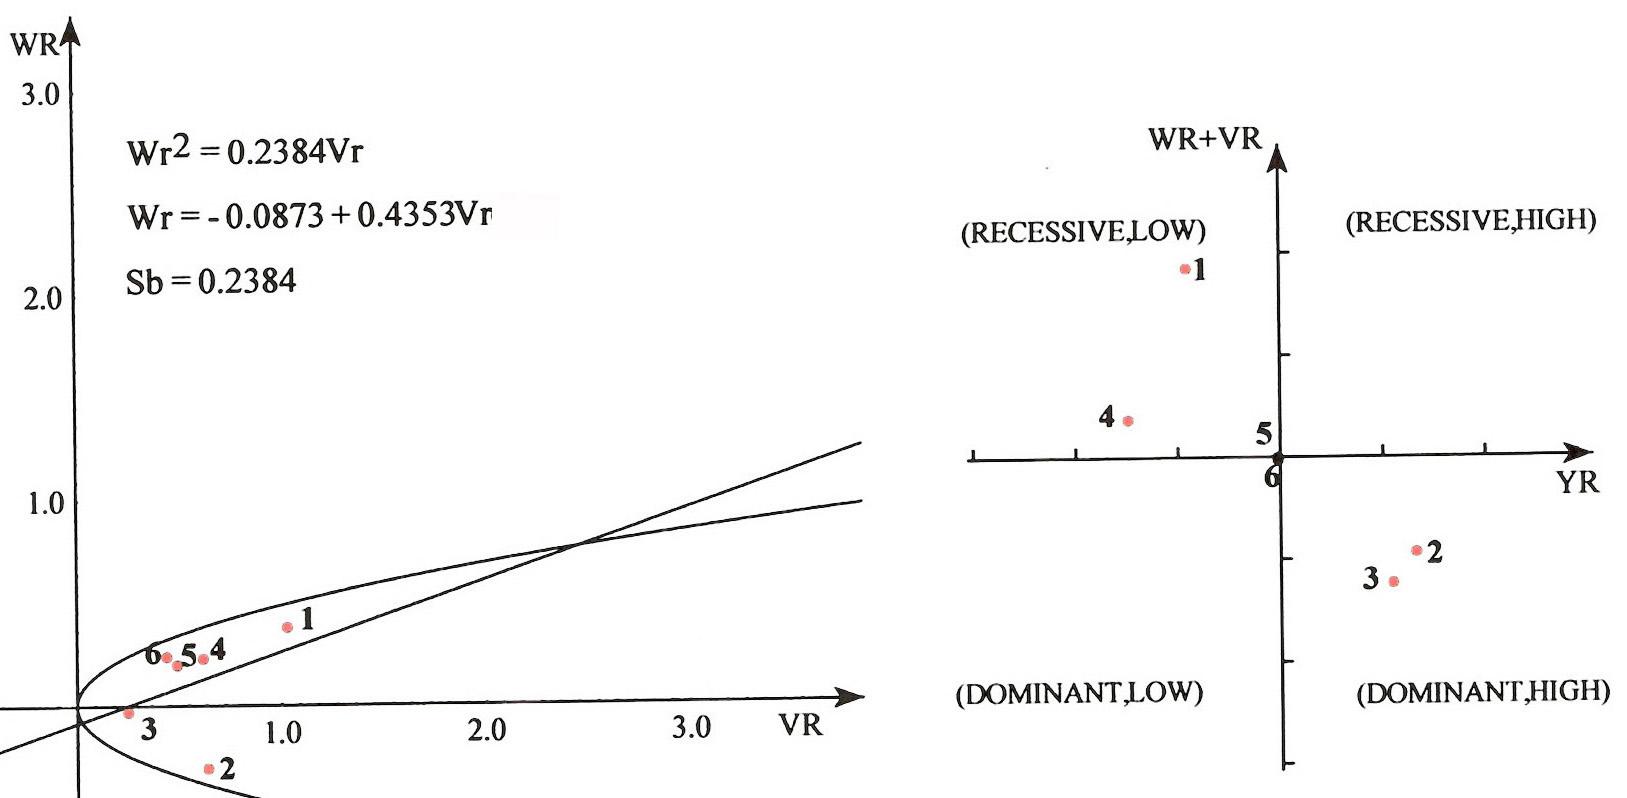 Variance(Vr), covariance(Wr) and standardized deviation graph for width of leaf base (1: Cheongchima, 2: Nokchima, 3: Yulpung, 4: Jaba, 5: Kangpung, 6: Clarement).